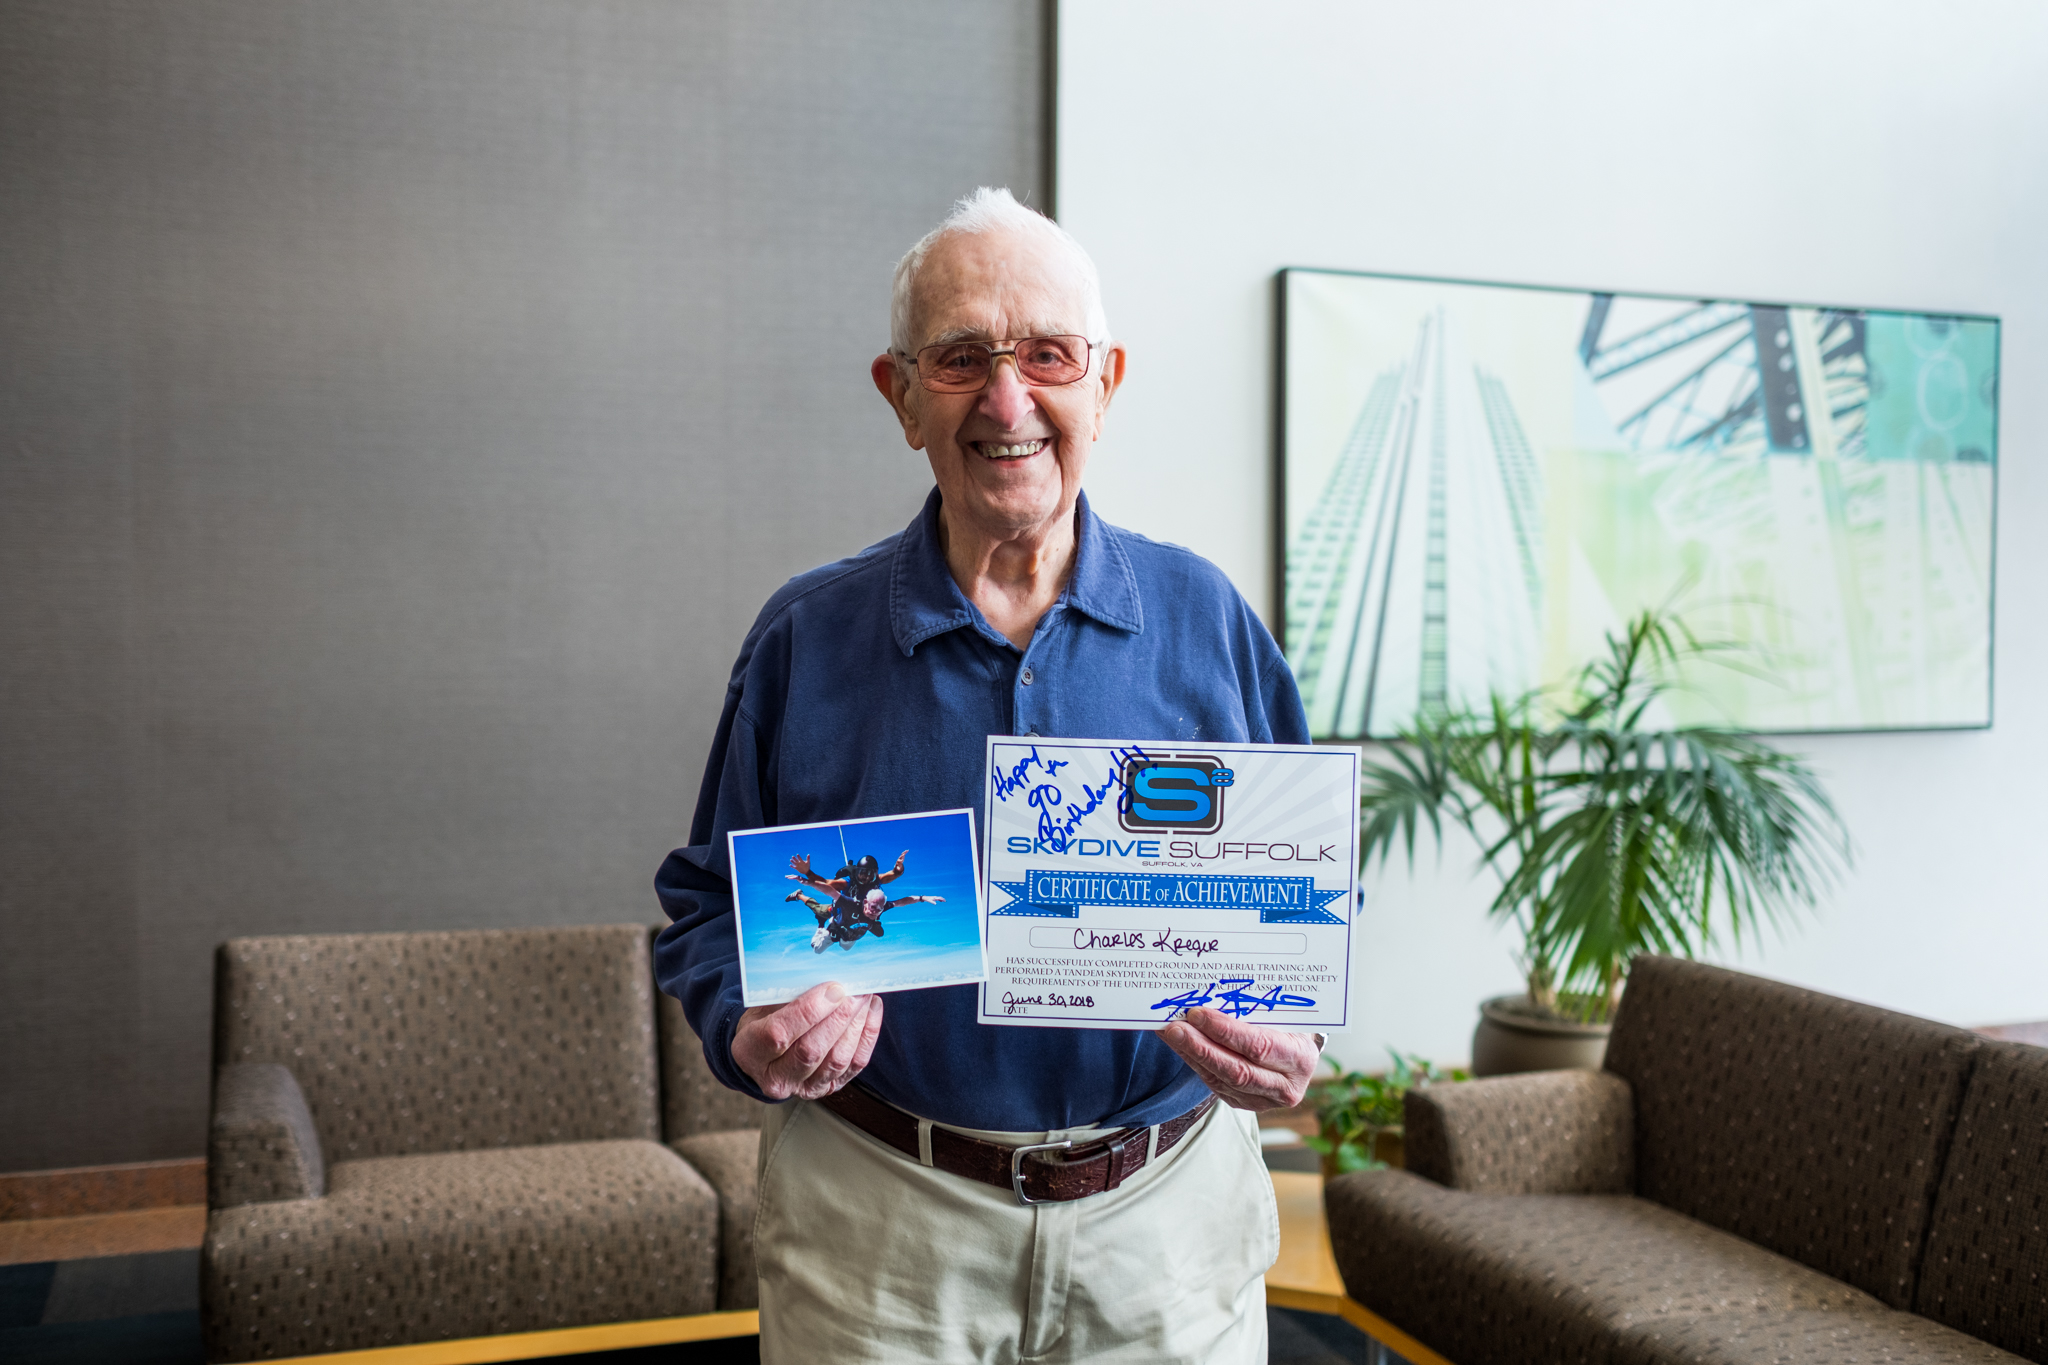 For his 90th birthday, Charles K. of Eastpointe went skydiving. Seventeen years ago, he had open heart surgery through Cardiology Associates of Michigan.